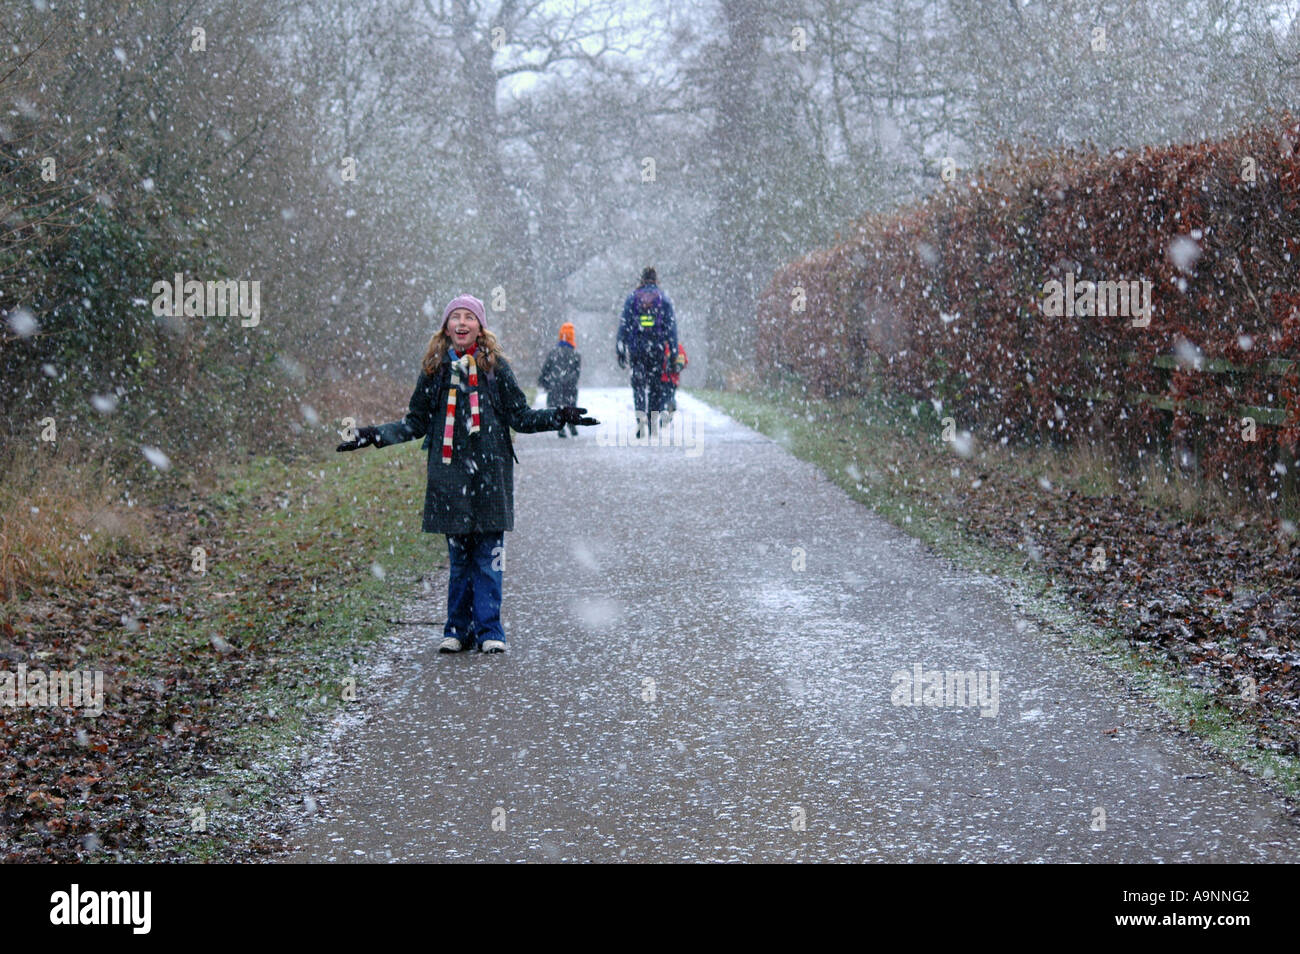 Family going for a walk in the snow Stock Photo